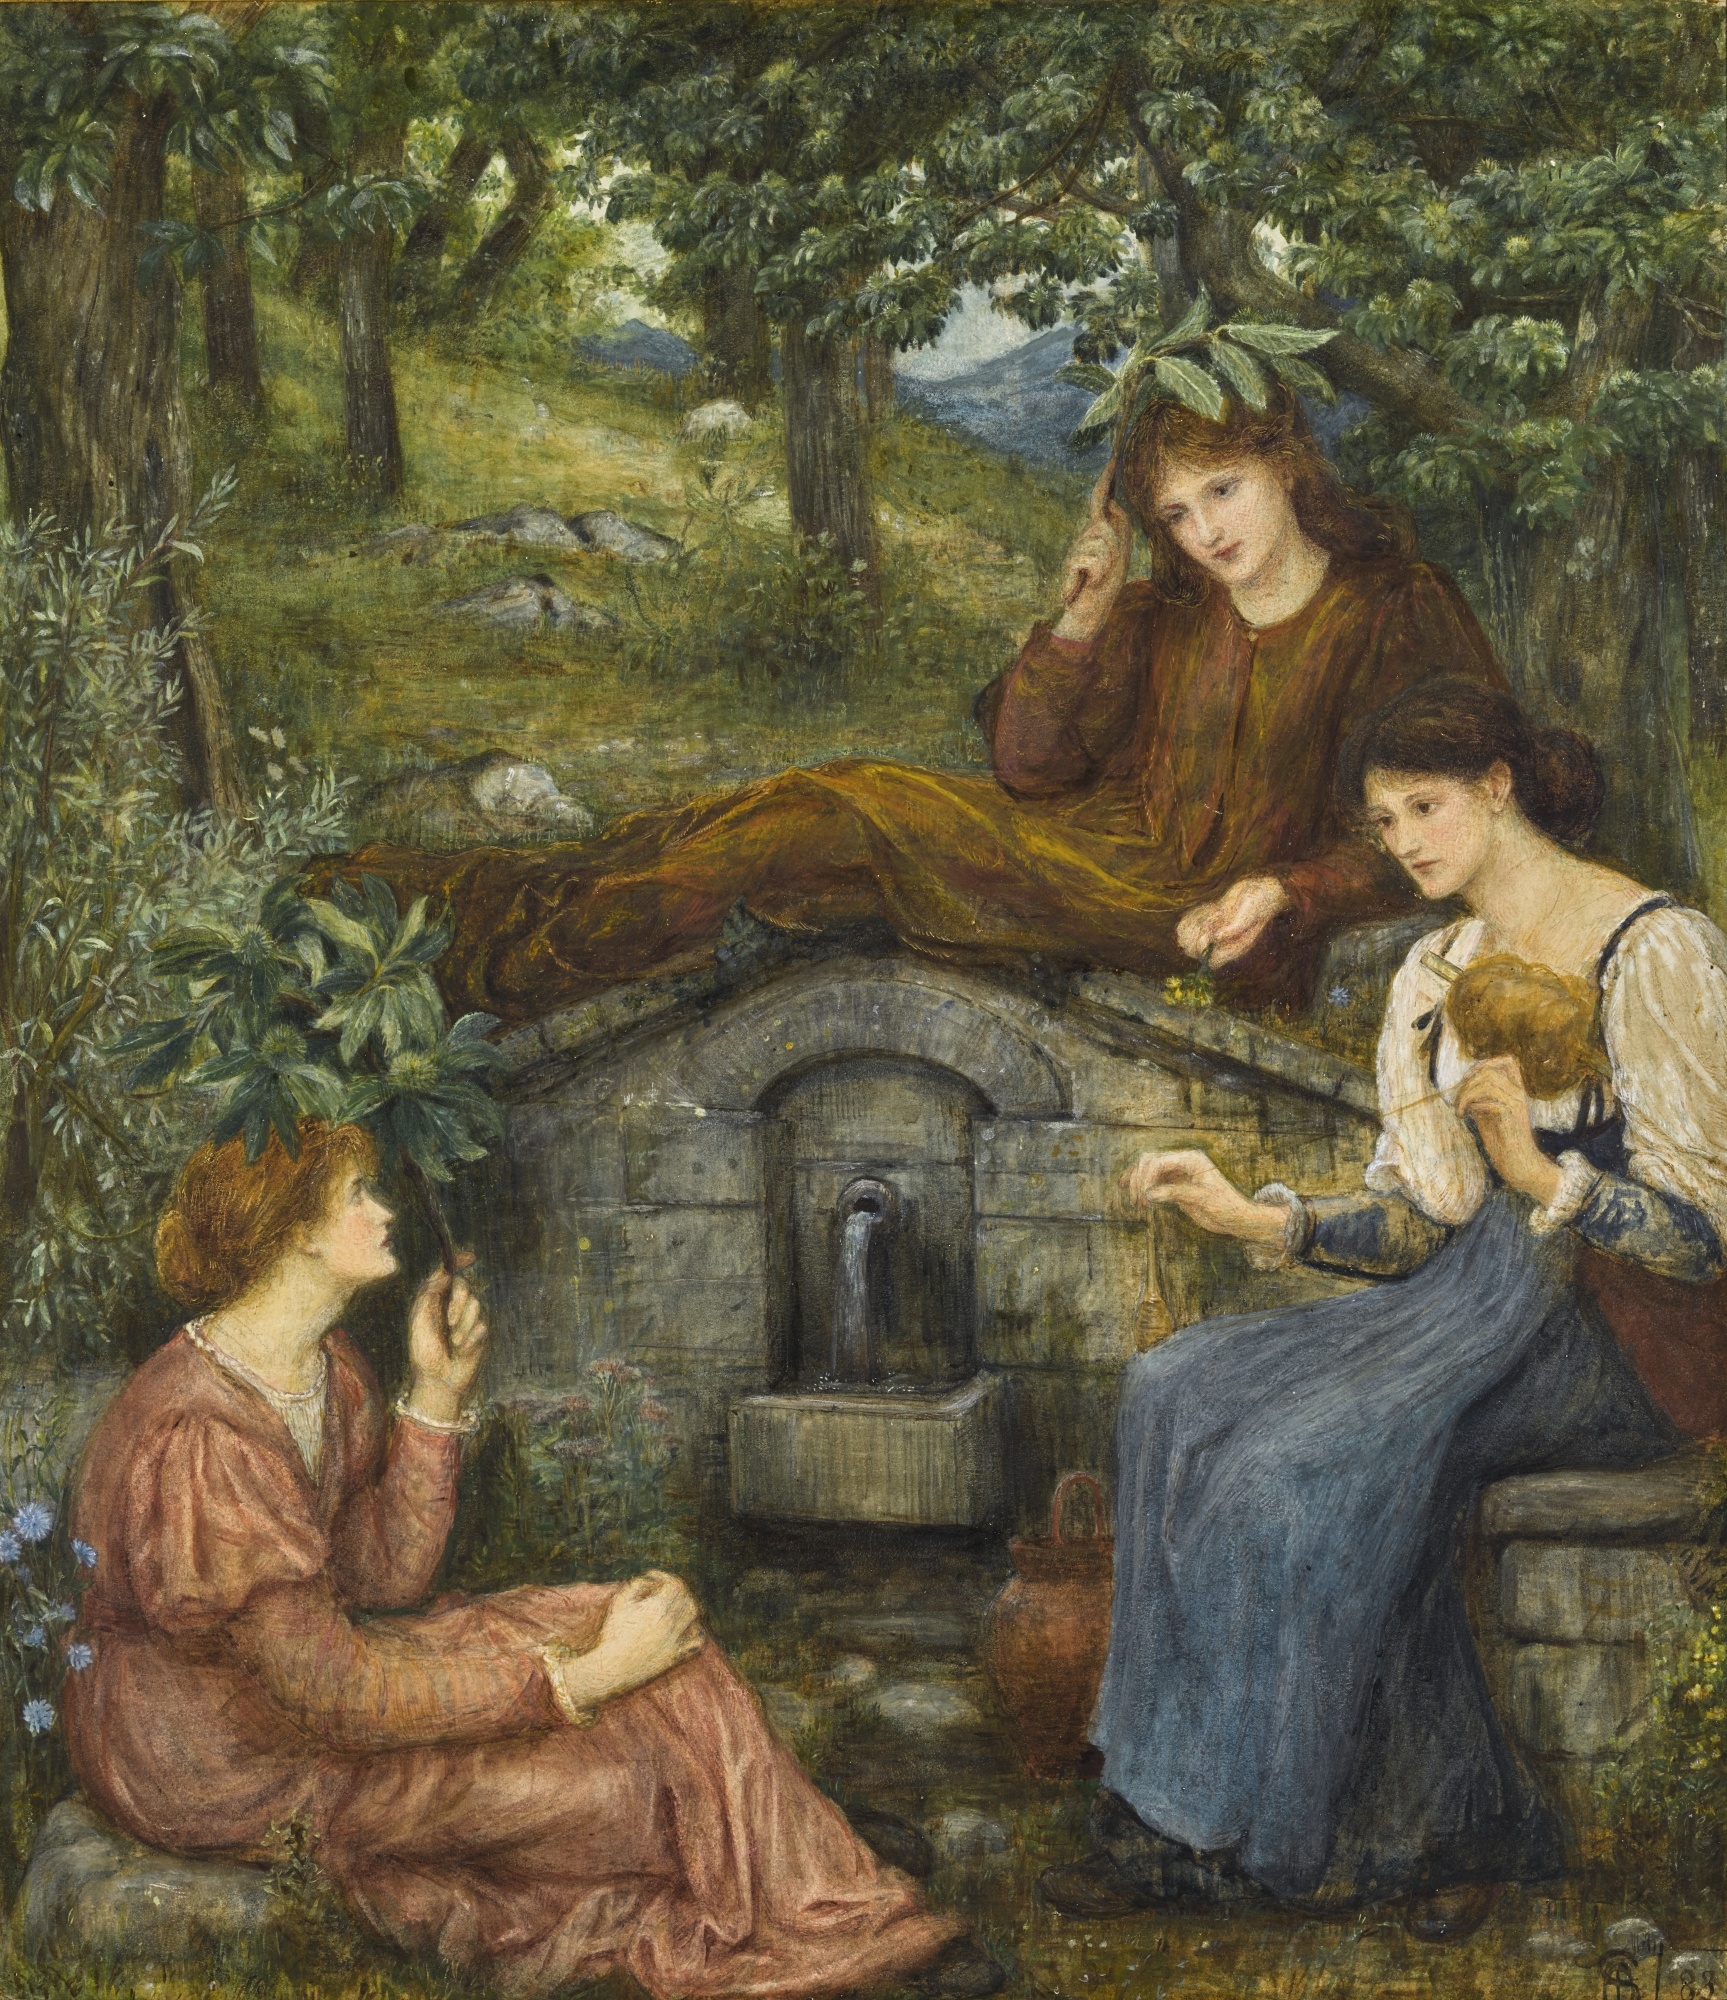 BY A CLEAR WELL, WITHIN A LITTLE FIELD by Marie Spartali Stillman, 1883